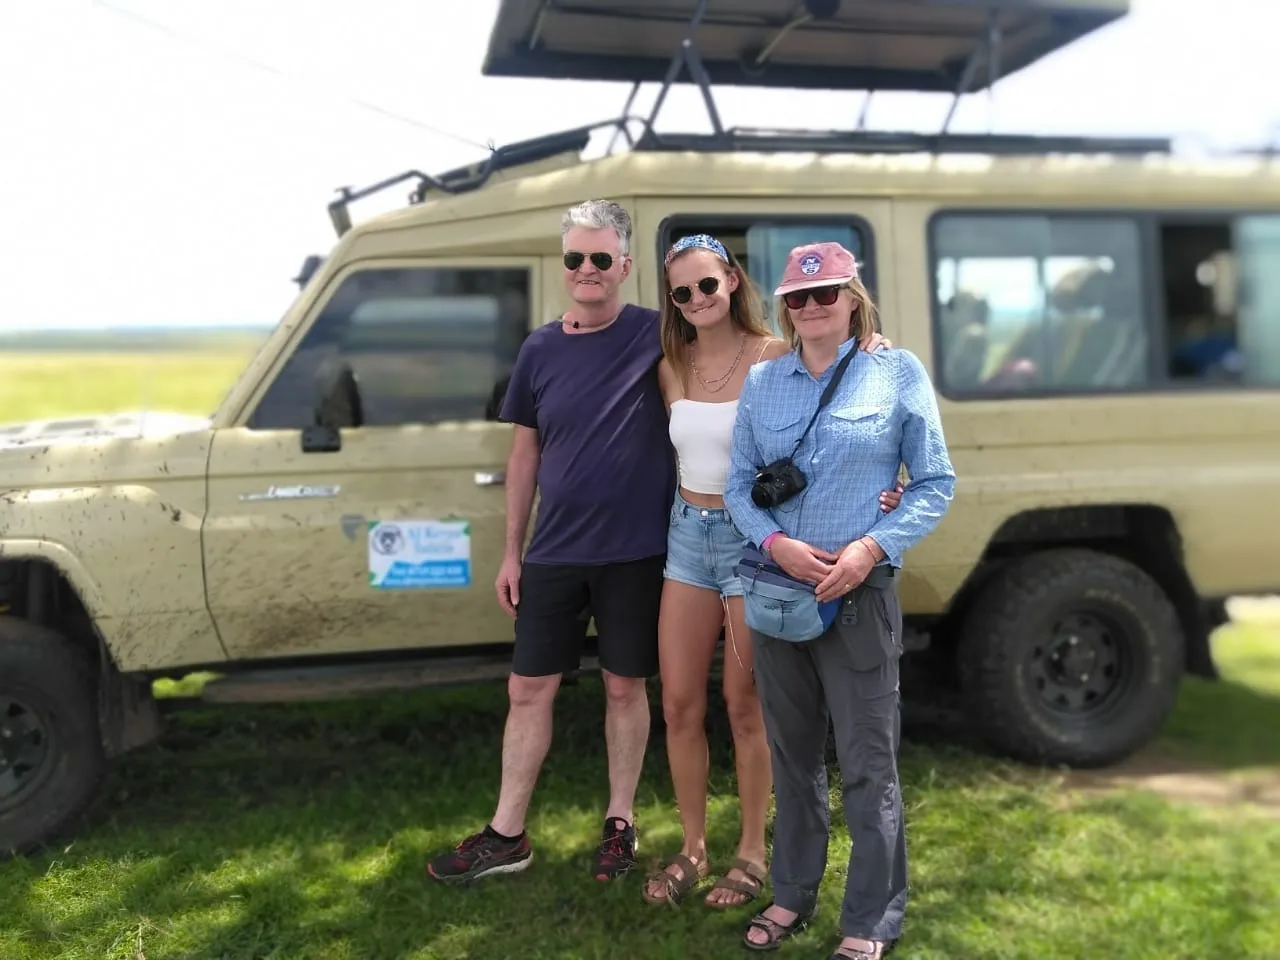 India to Kenya Tour Packages - Our Guests in Masai Mara